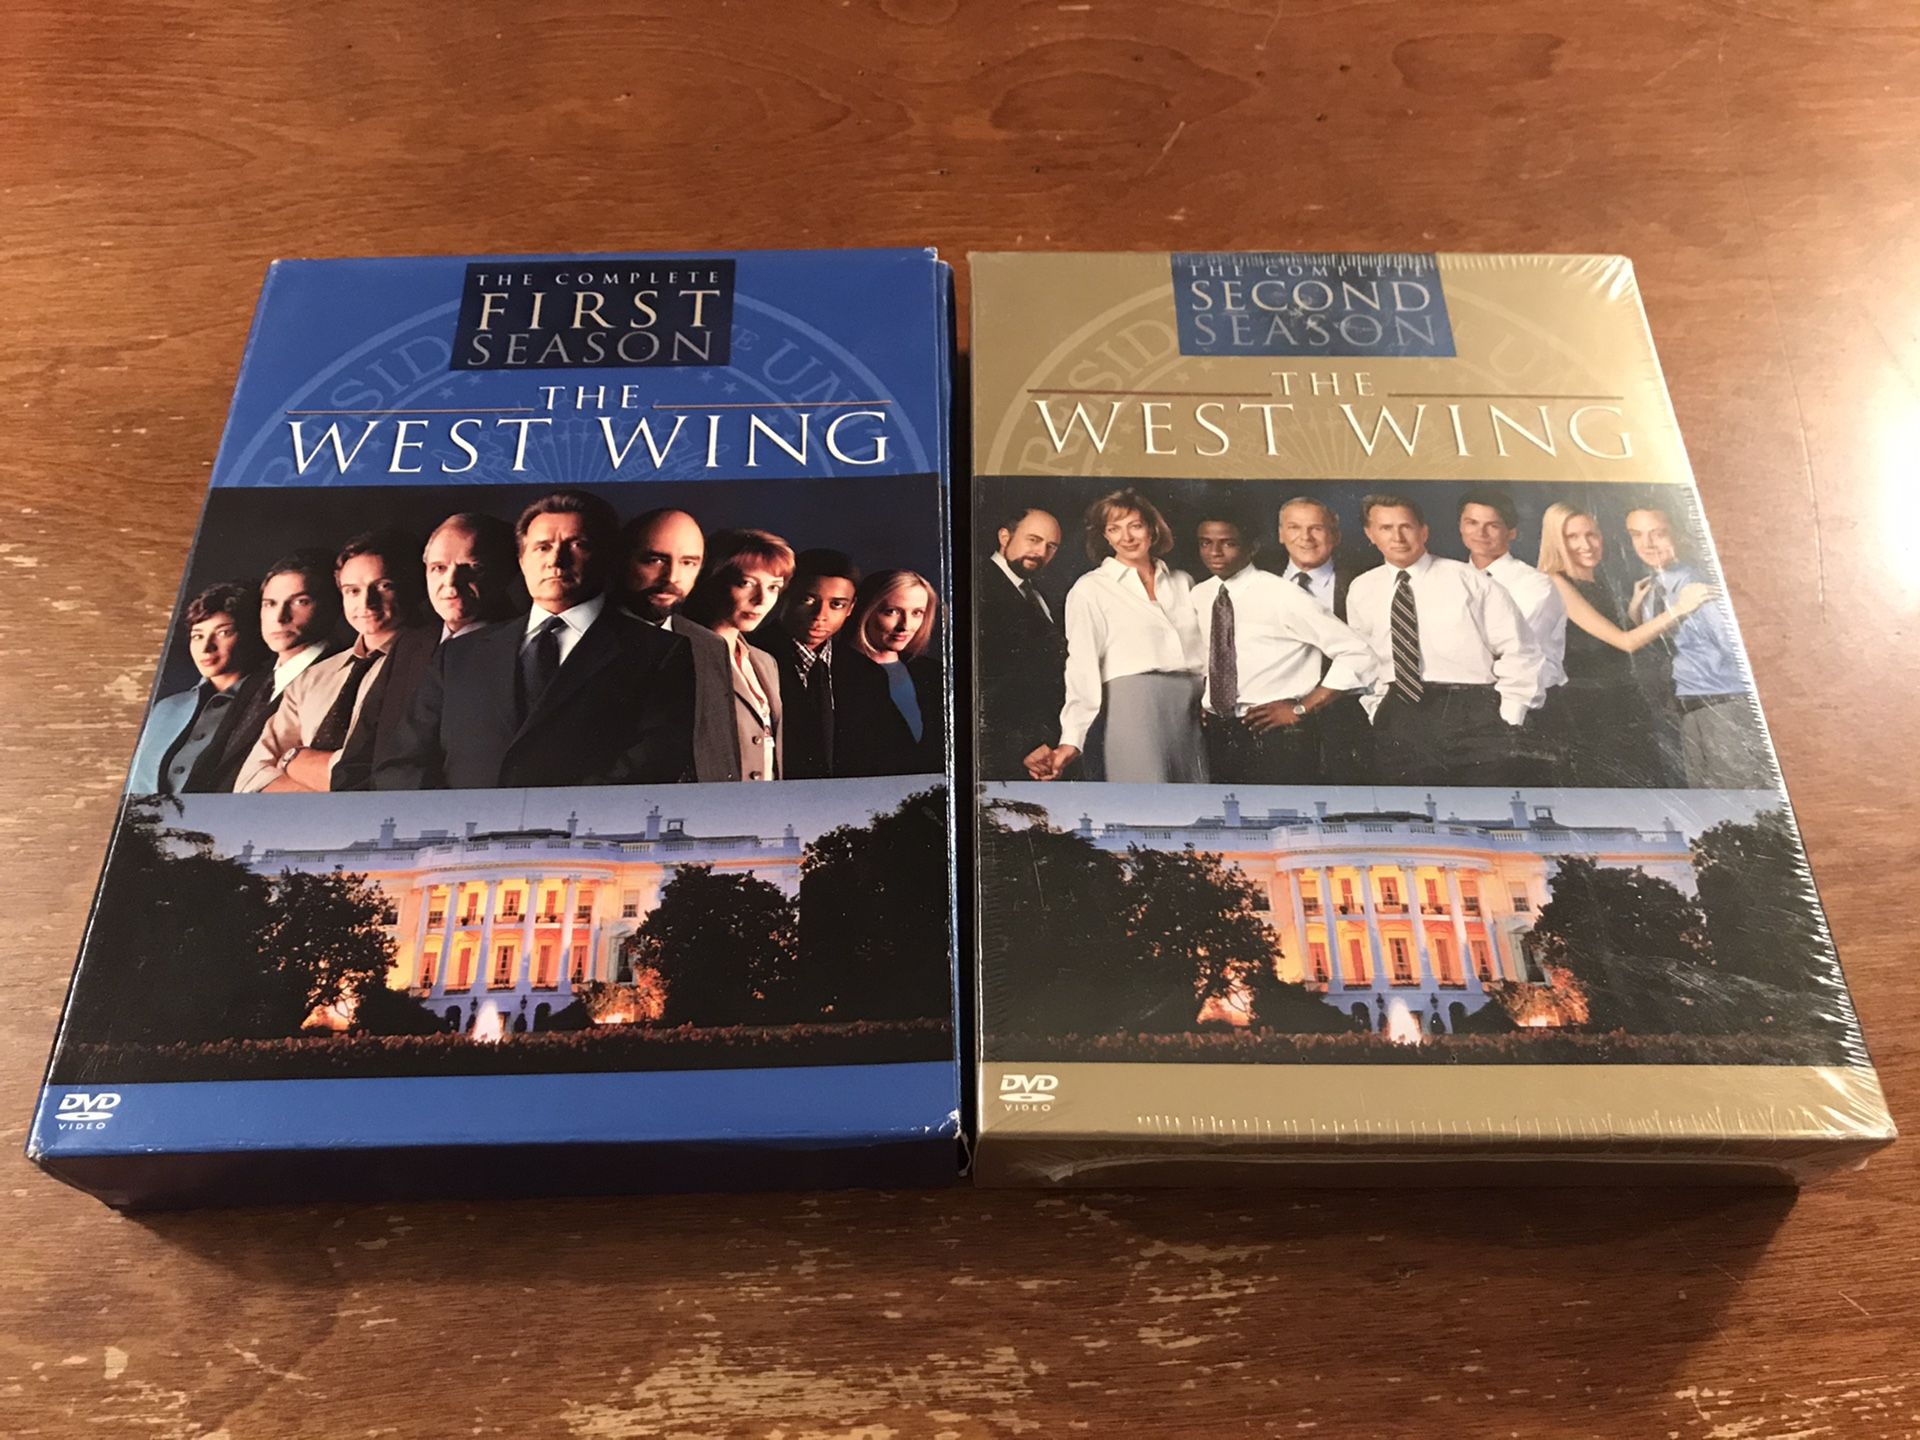 The West Wing DVD collection